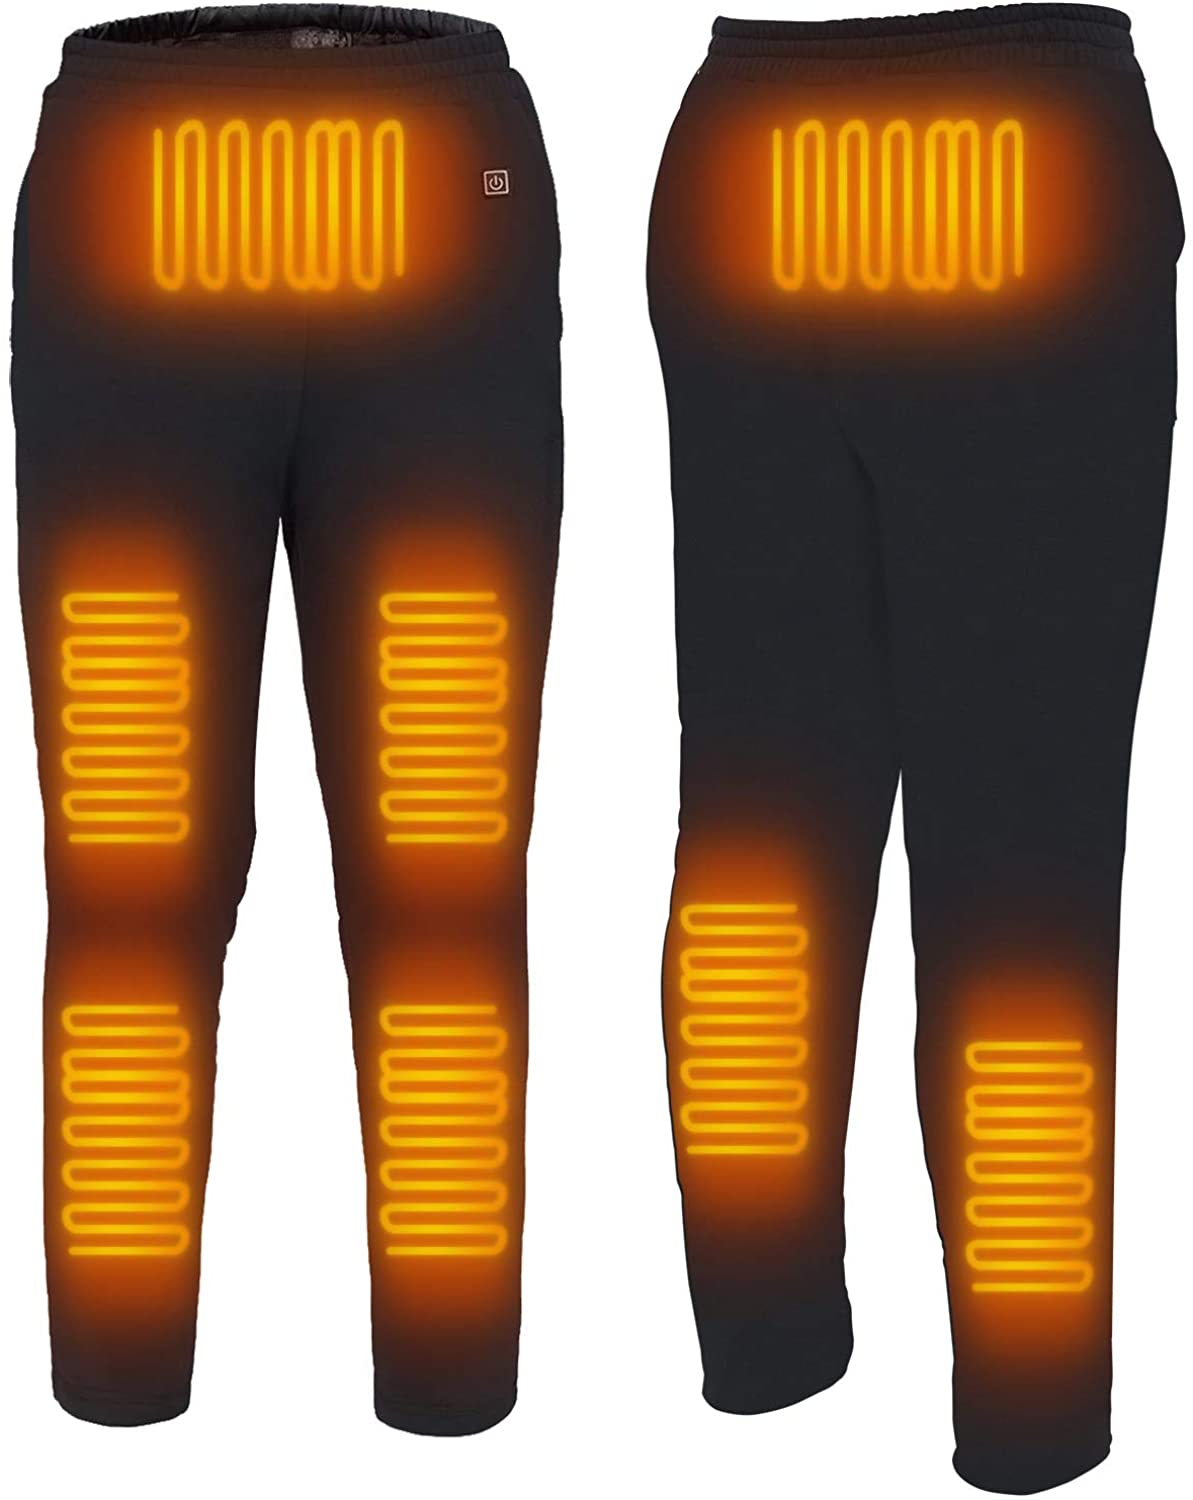 Heated Pants USB 5V Electric Heating Pants for Men Women Outdoor Winter Heating Trouser, 8 Heating Zone(Battery Not Included) - Home Decor Gifts and More